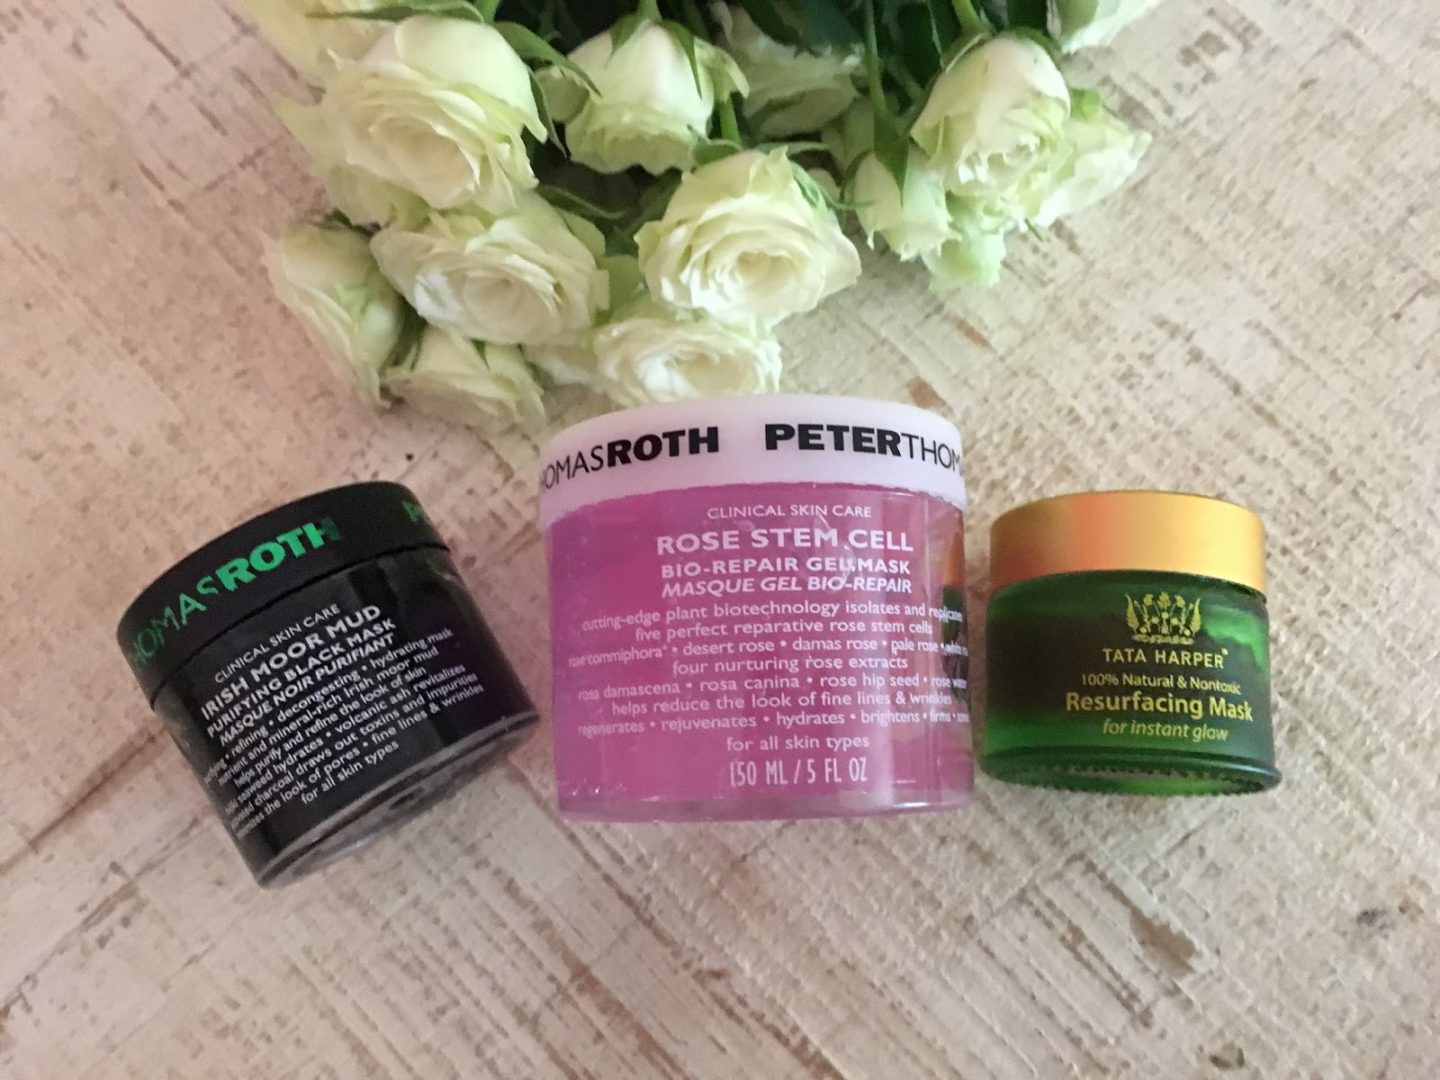 Favorite face masks: Tata Harper and Peter Thomas Roth | The Brunette Nomad